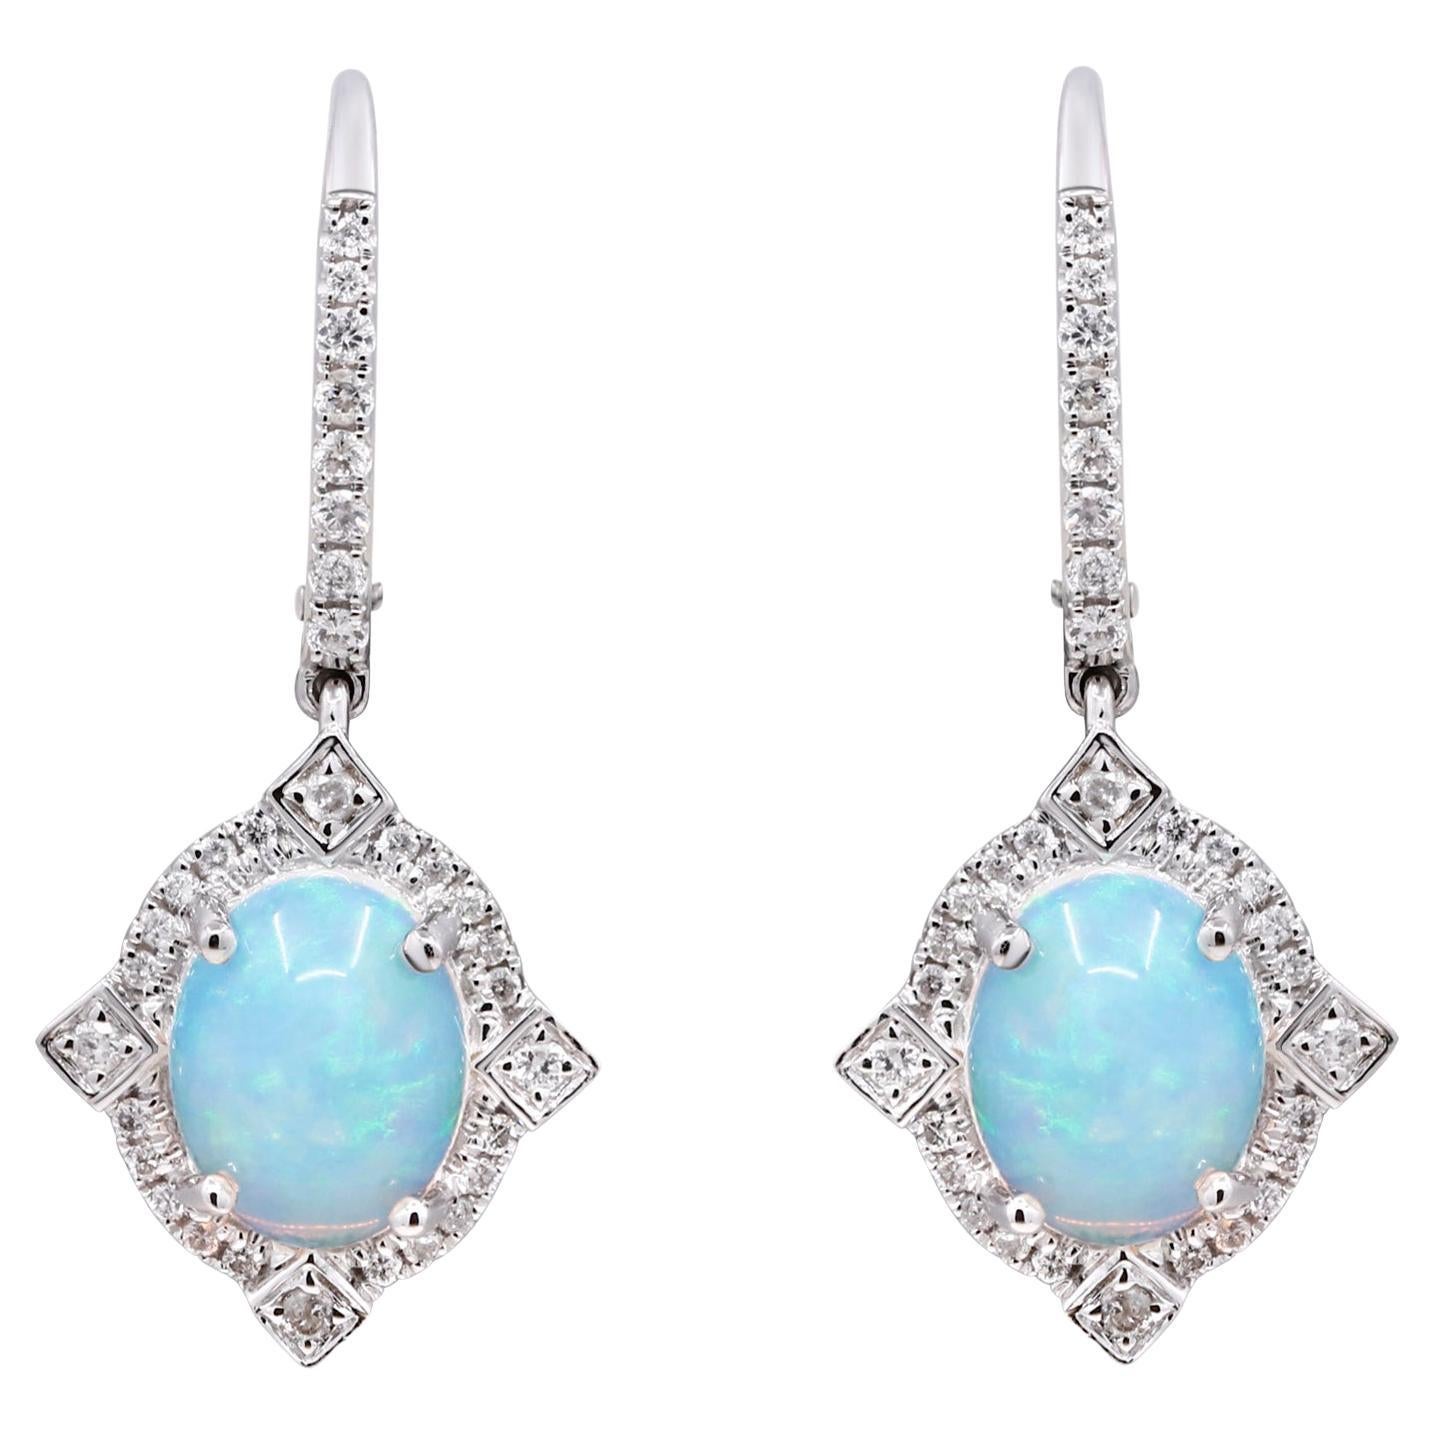 2.68 Carat Oval Cab Ethiopian Opal with Diamond Accents 10K White Gold Earring